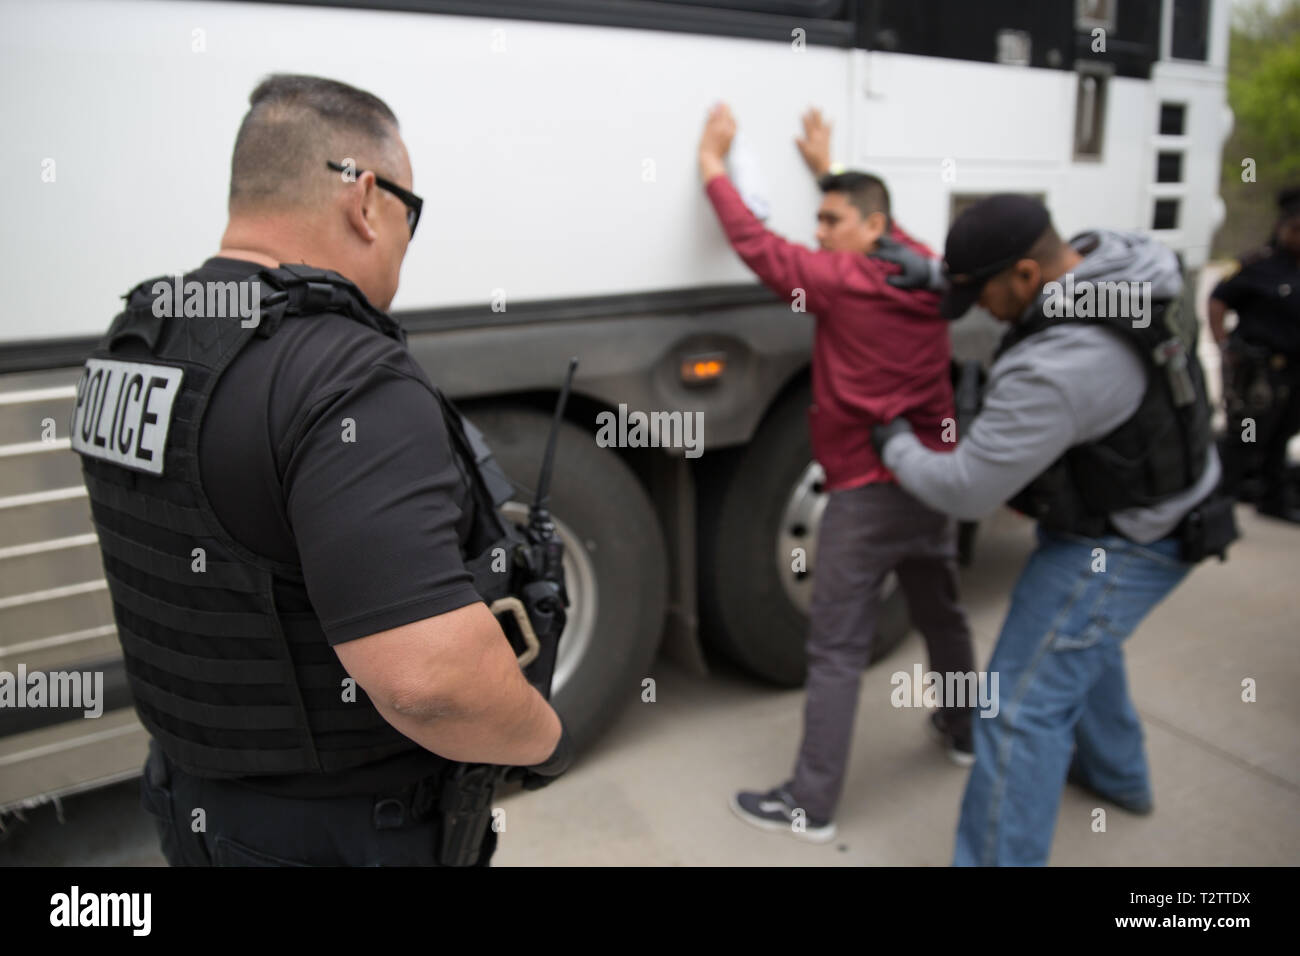 U.S. Immigration and Customs Enforcement agents search a suspected undocumented immigrant during a raid at CVE Technology Group April 3, 2019 in Allen, Texas. ICE agents arrested 280 employees of the cellphone repair company in the largest worksite operation in more than a decade. Stock Photo